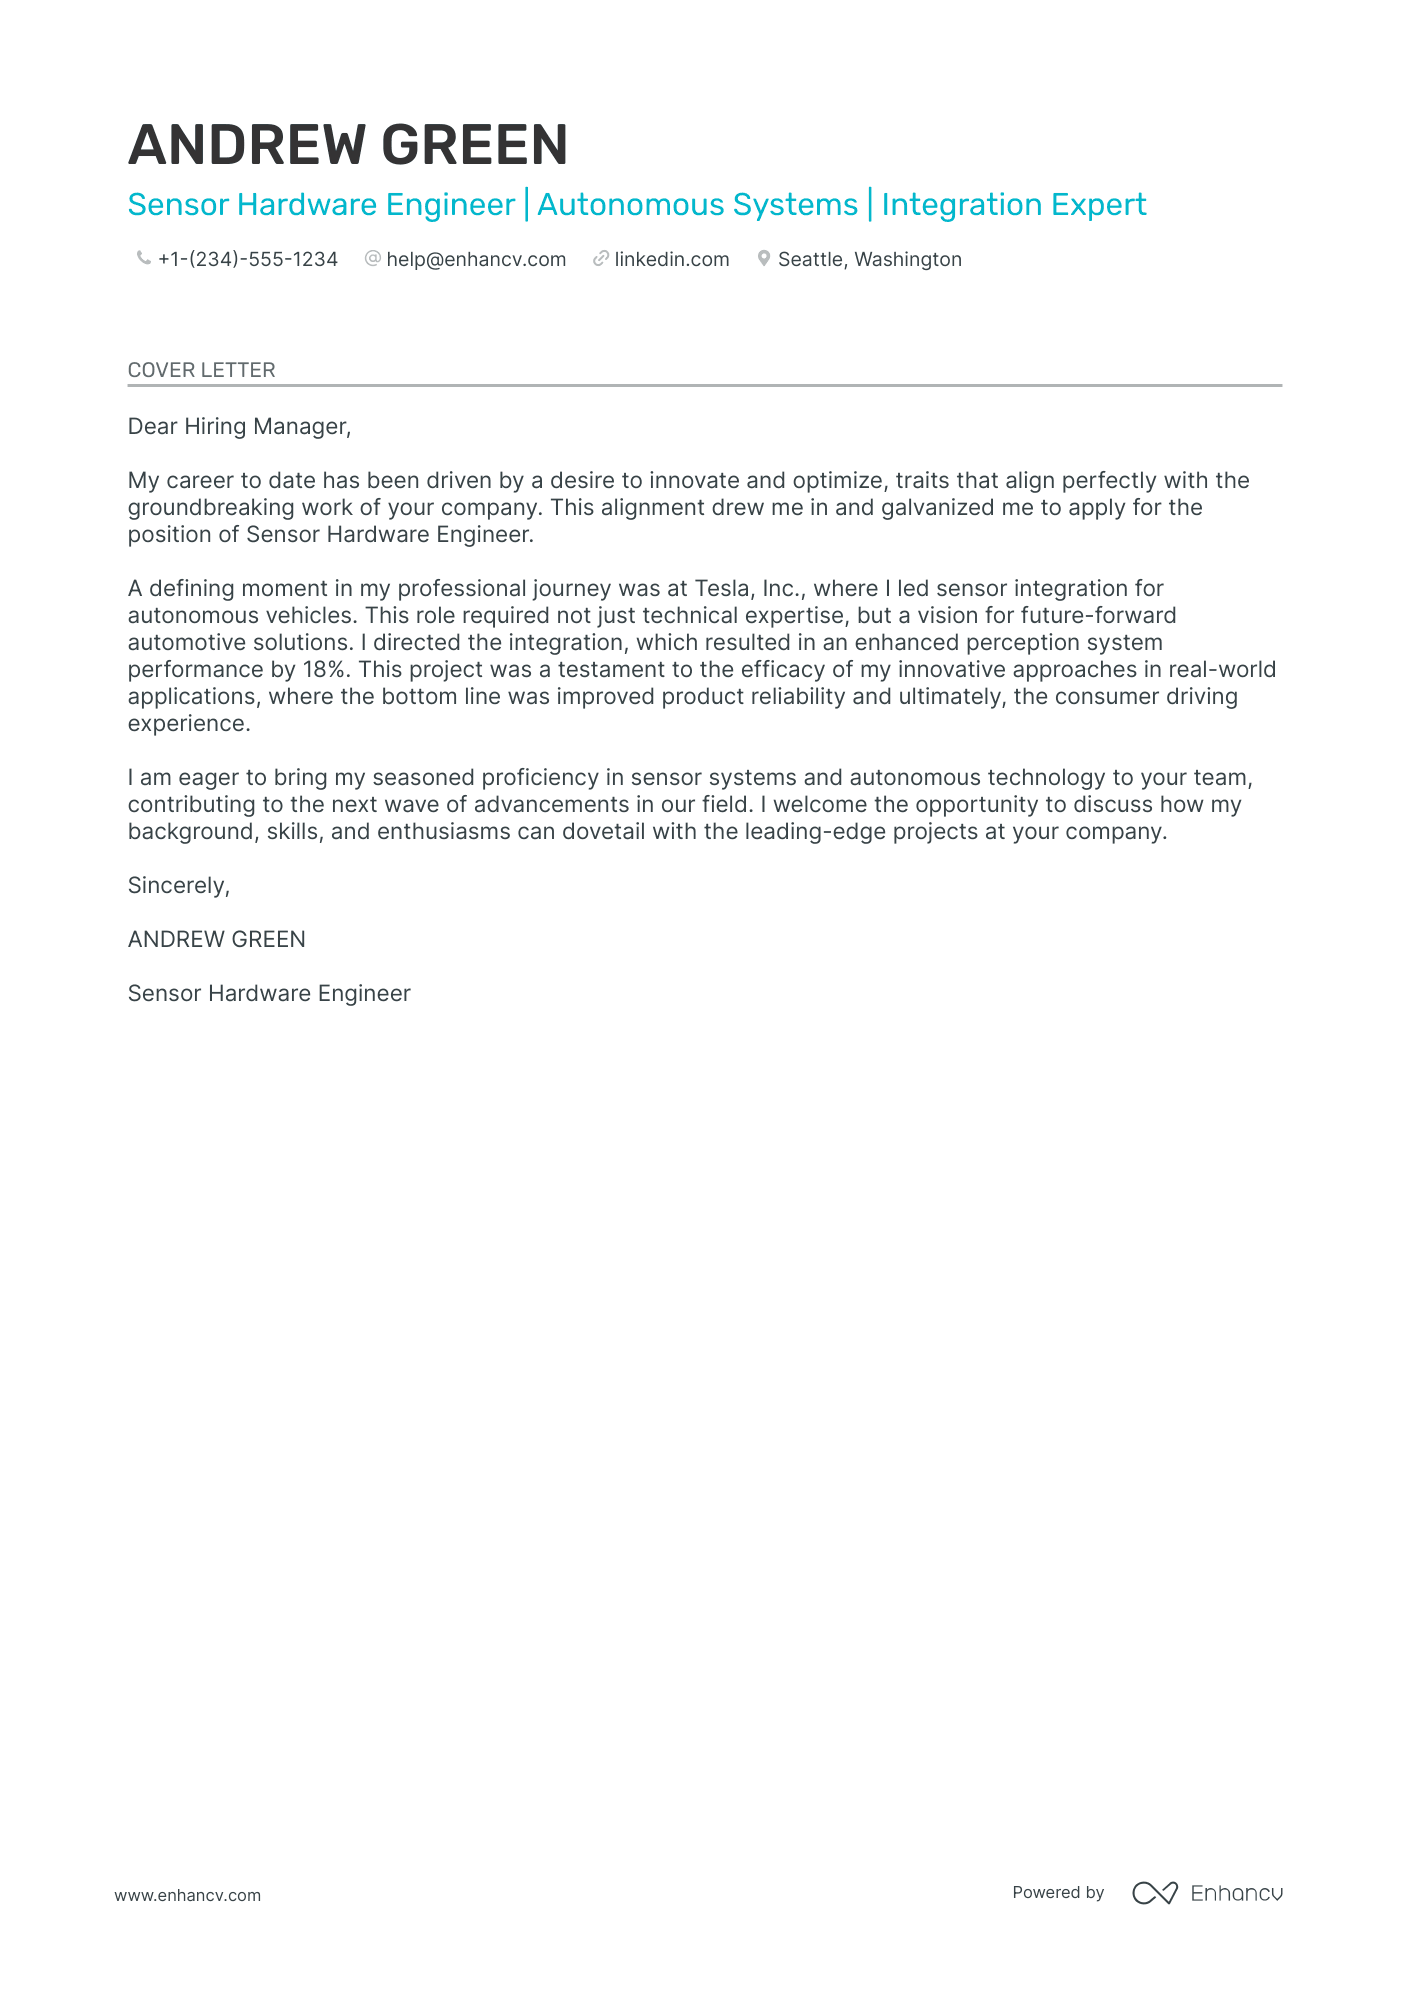 cover letter about engineer